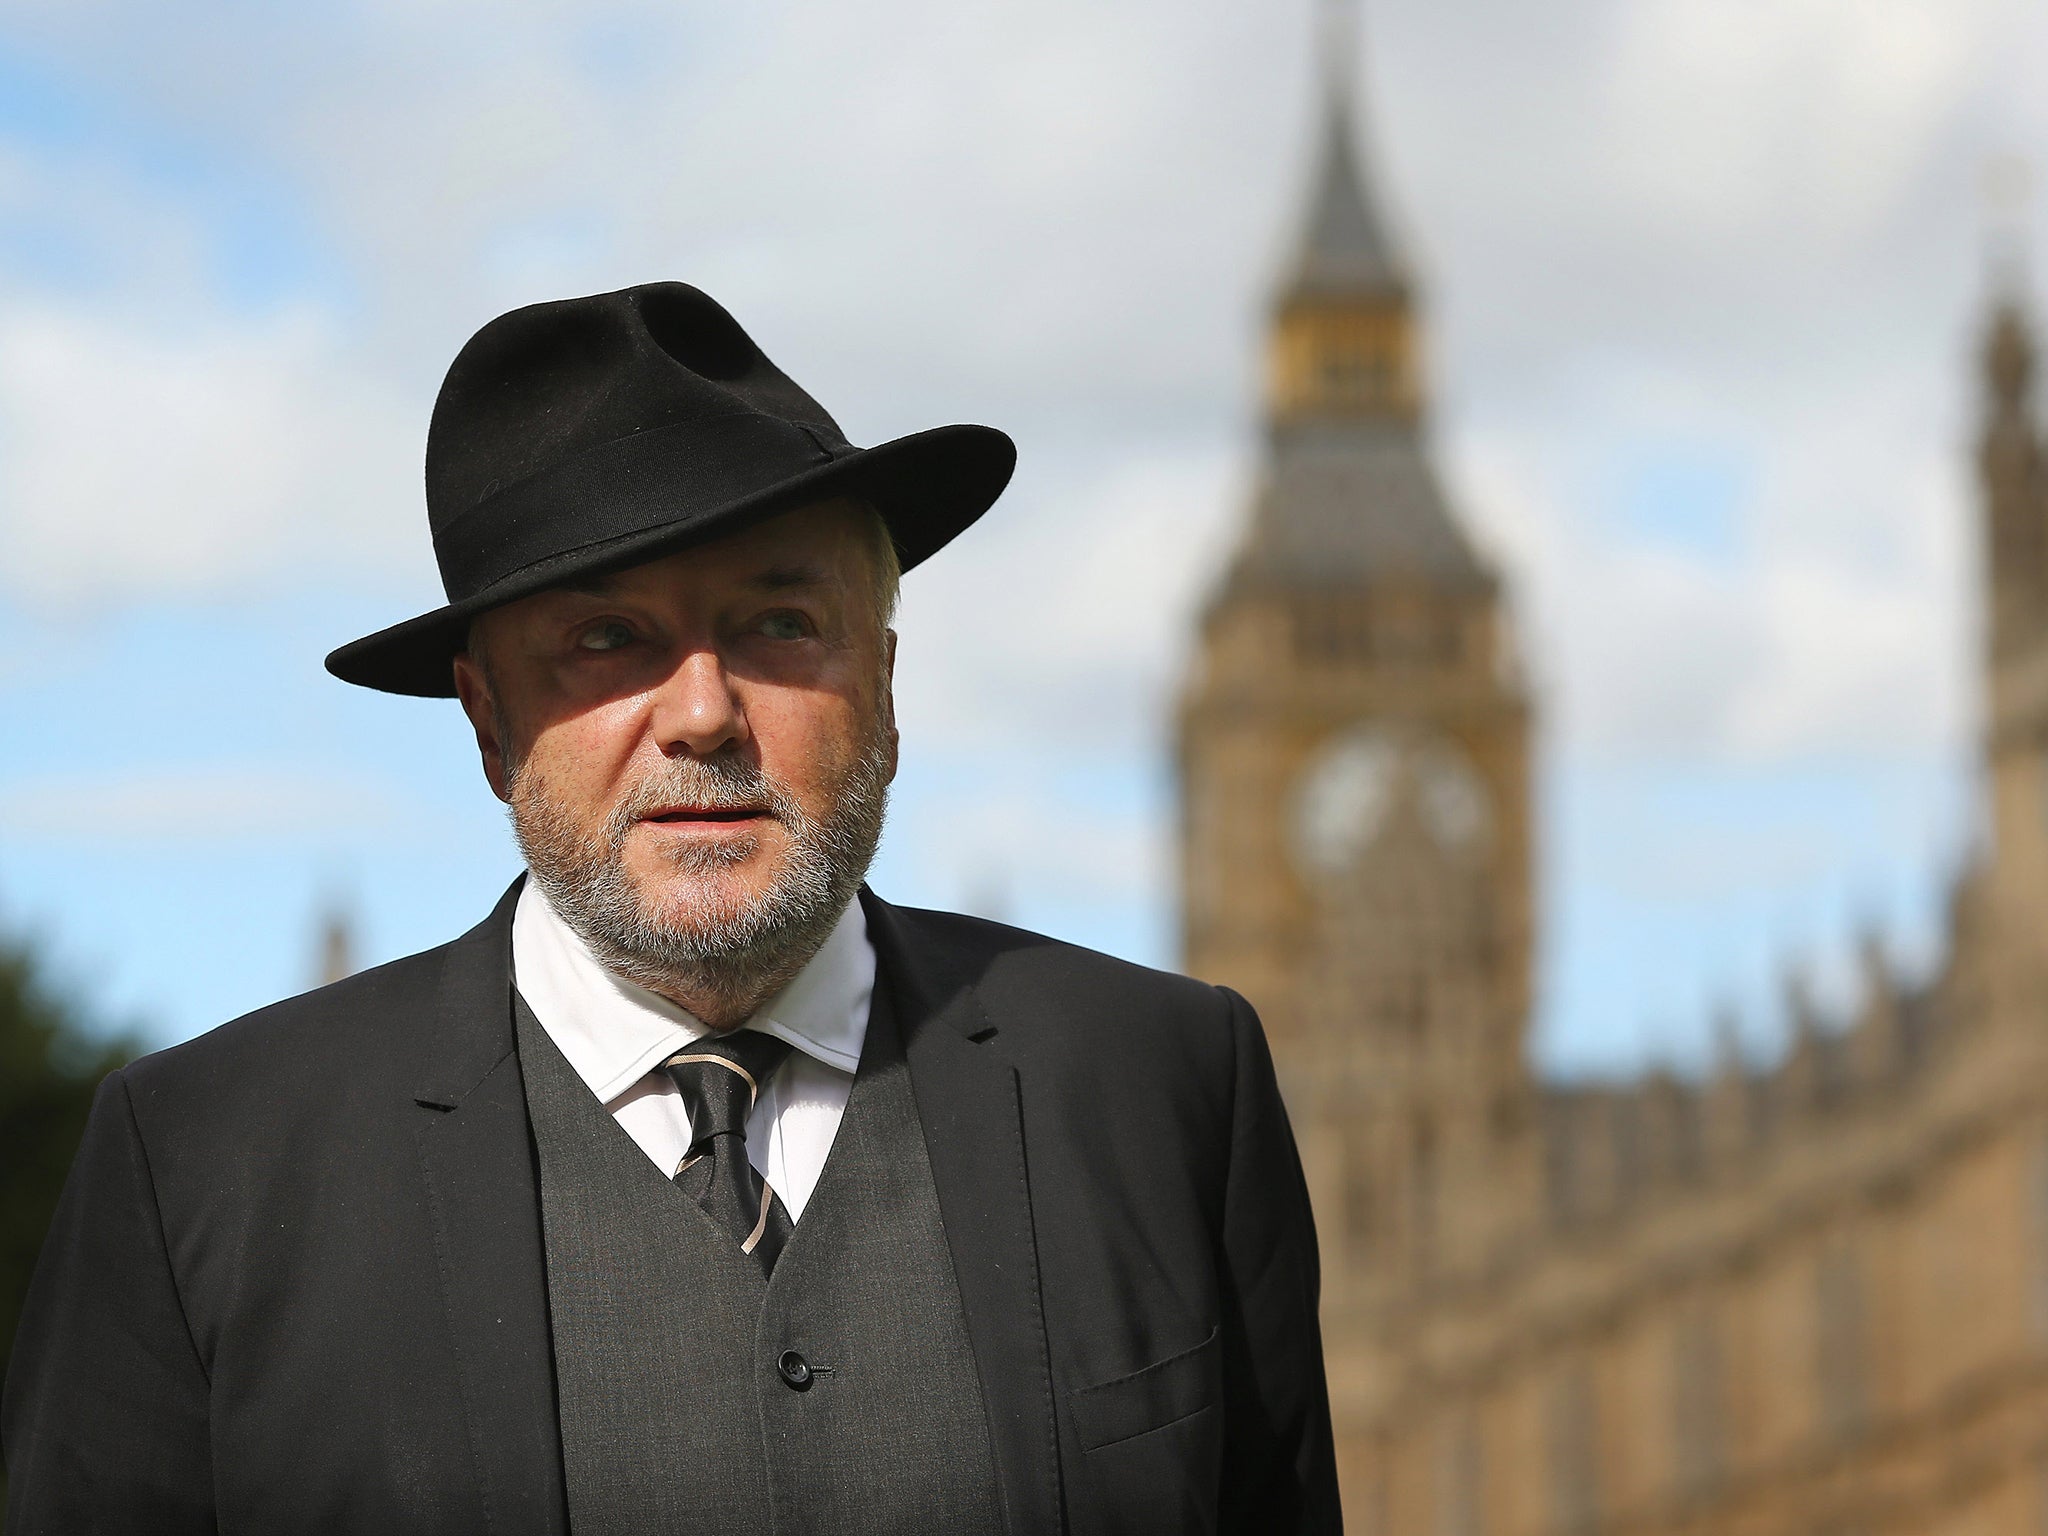 Jeremy Corbyn is not in favour of letting George Galloway back into Labour